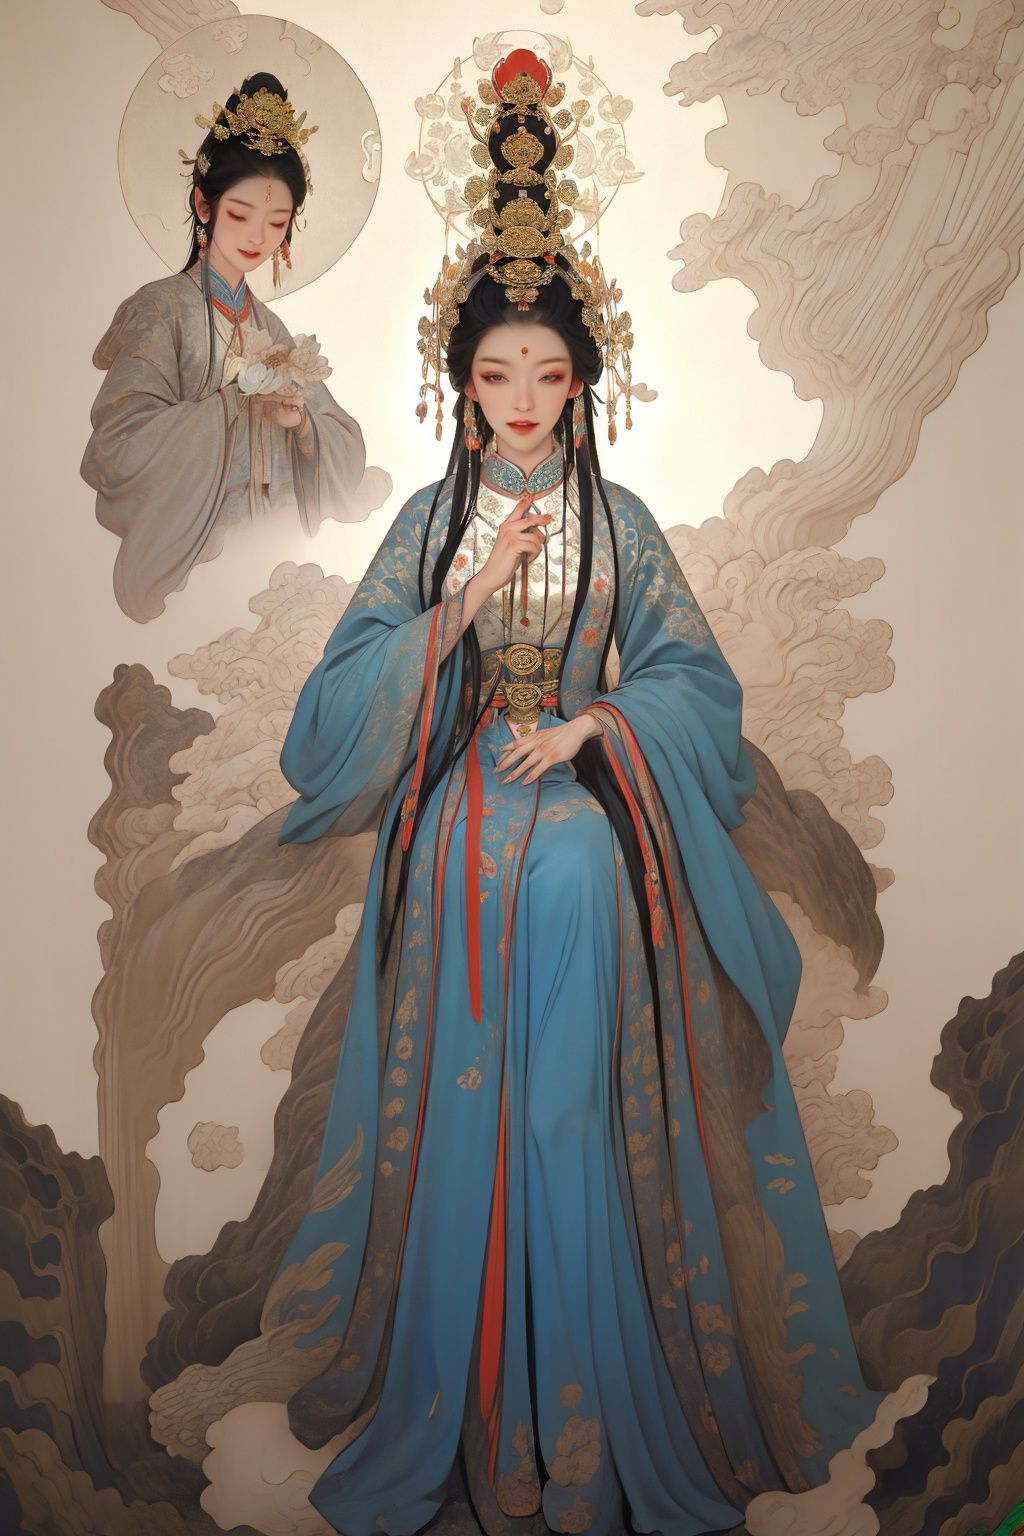 masterpiece,best quality,8K,HDR,exquisite details,1girl,<lora:Chinese Gongbi painting-000018:0.5>,goddess zi on the moon flying near the pond with some lotus flowers,Holding a white rabbit,in the style of harmonious color palette,multilayered compositions,detailed character design,nightmarish illustrations,light amber and green,traditional costumes,vibrant murals,